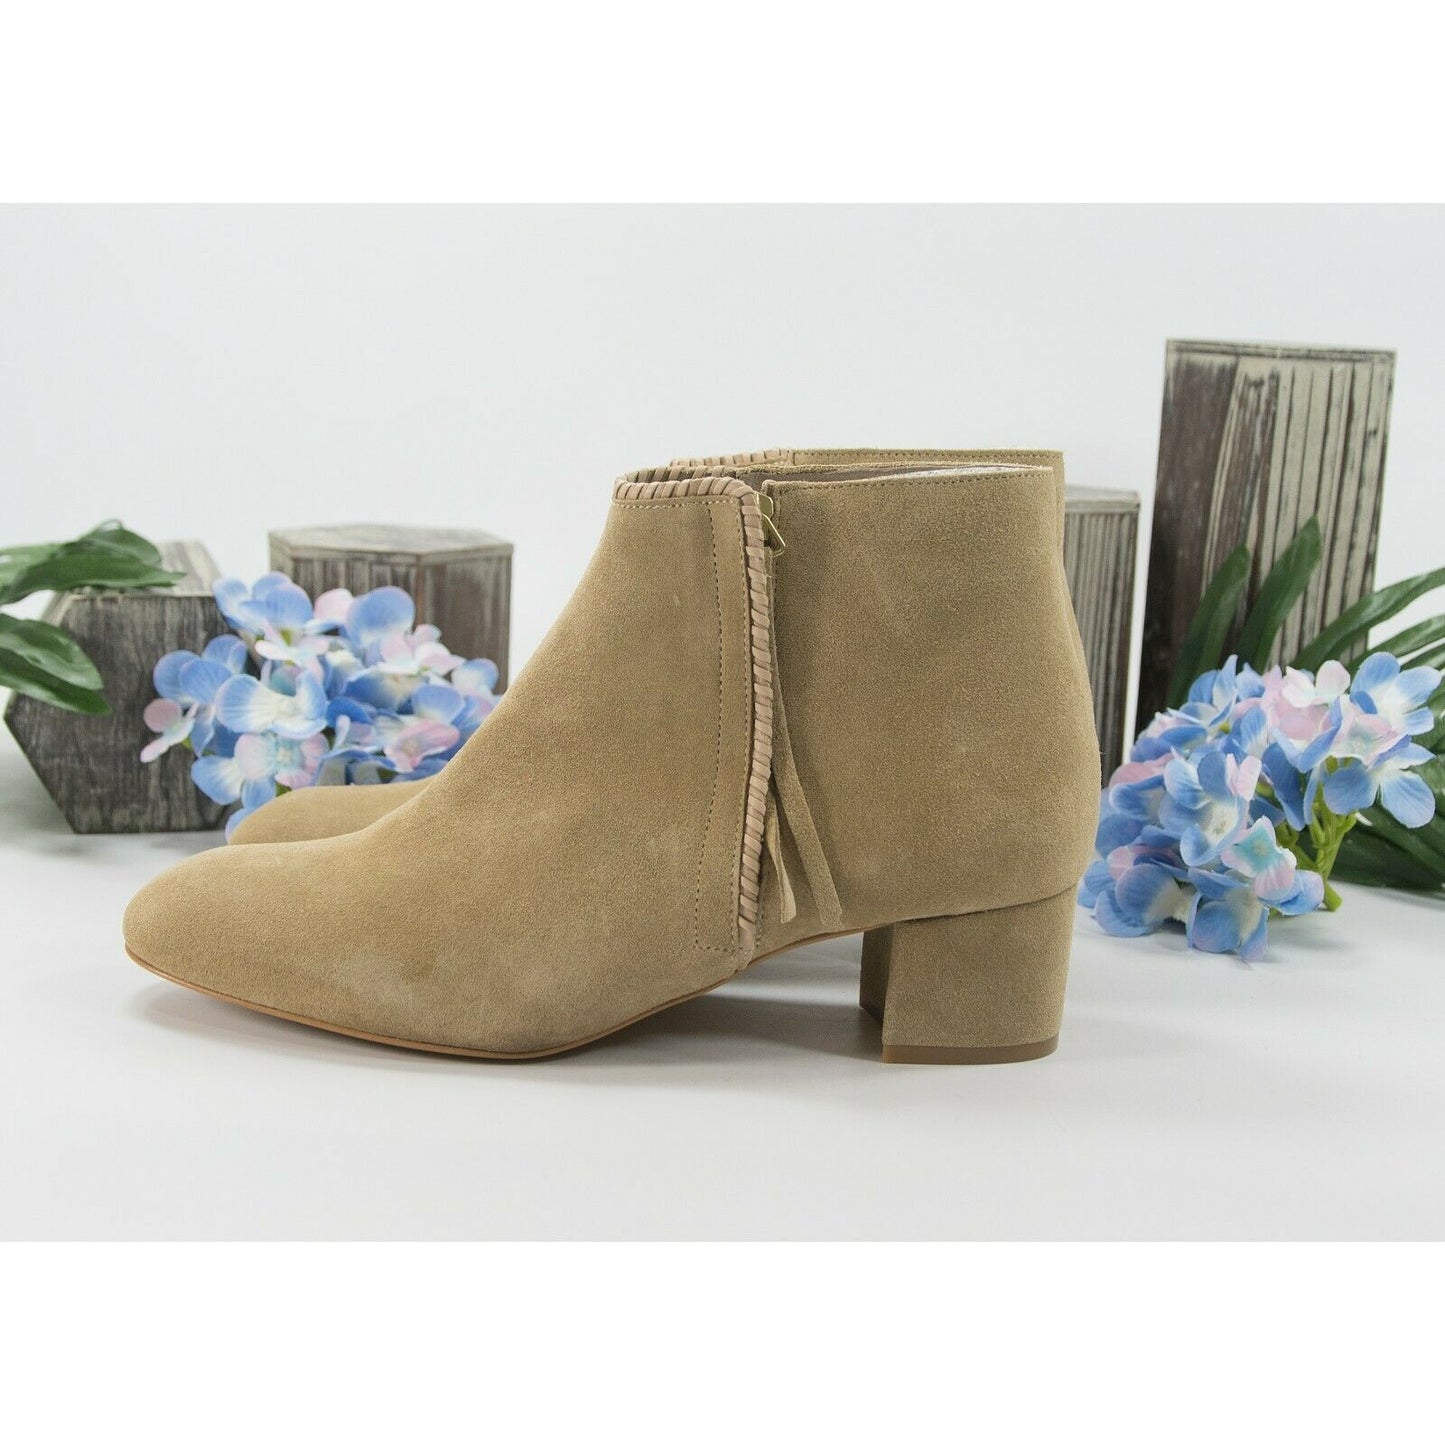 Maje Camel Suede Felicia Bootie Ankle Boot Shoes Sz 39 9